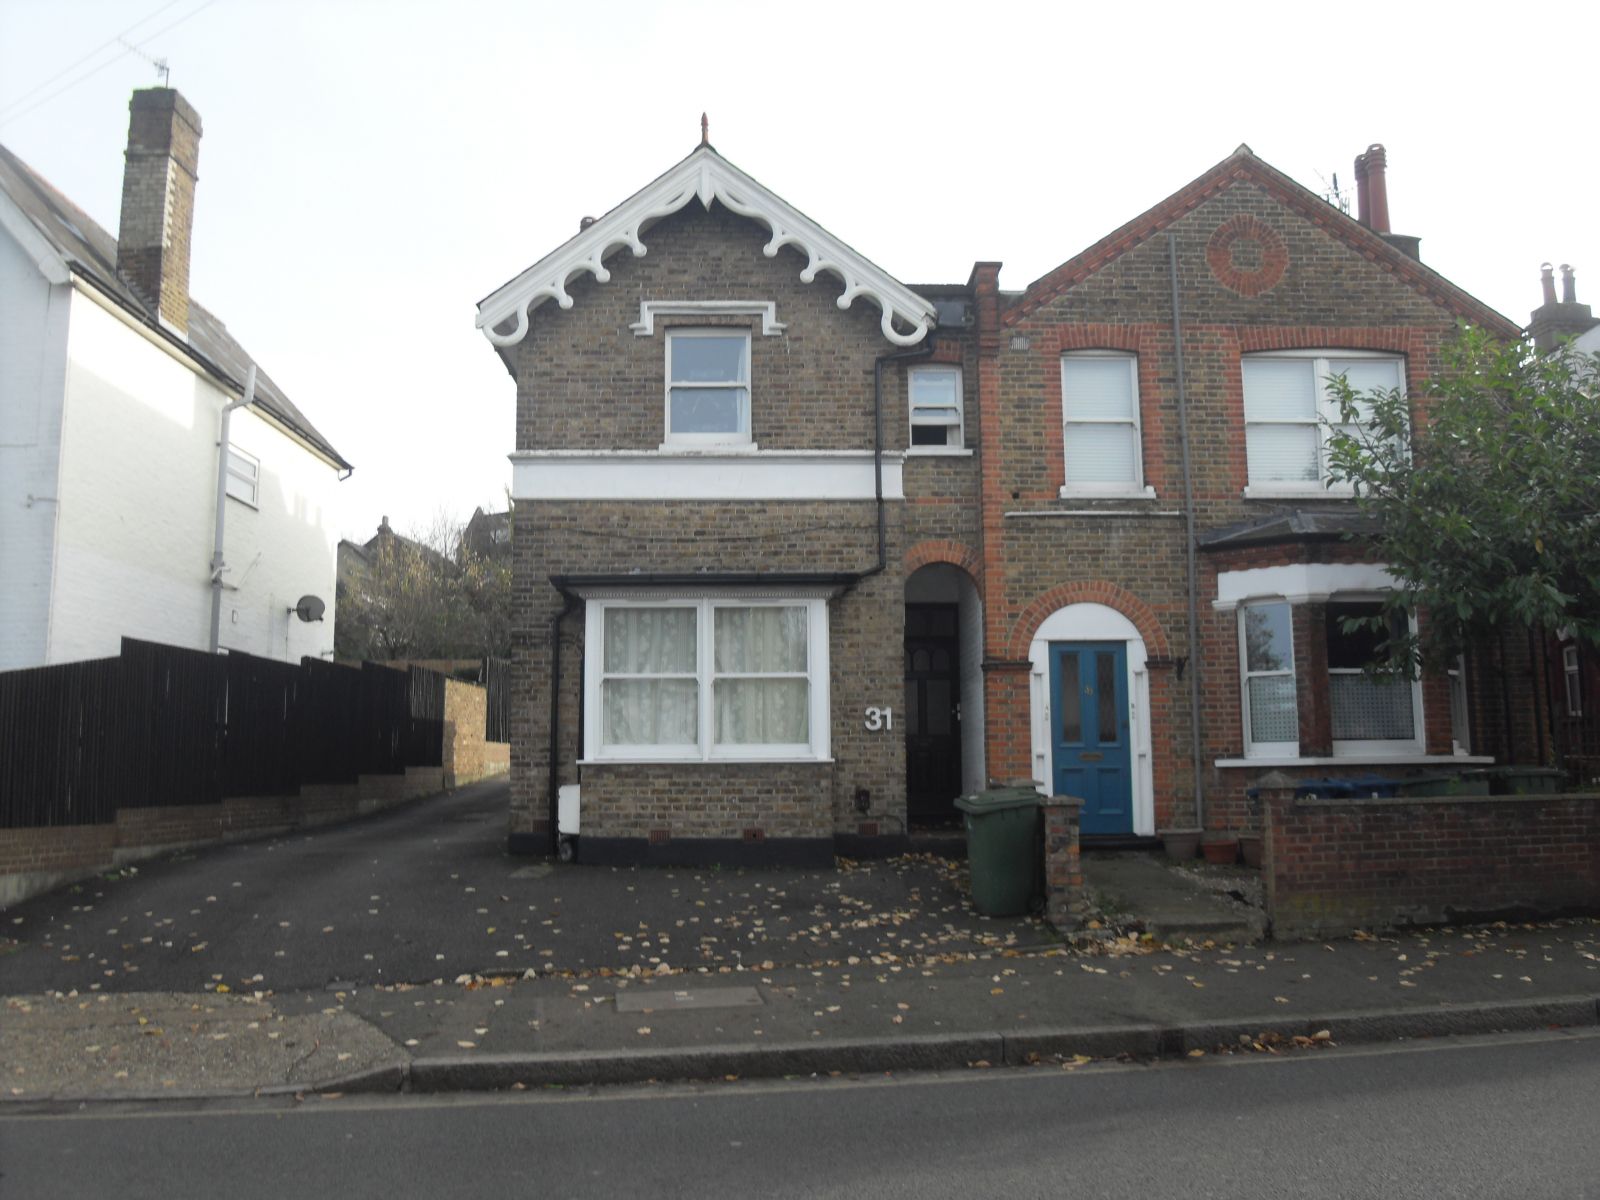 Property photo 1 of 9. 3 Bedroom Semi Detached House  ***Potential To Develop In To 2 Flats Subject To Pl:Anning Permission (Sstp)***